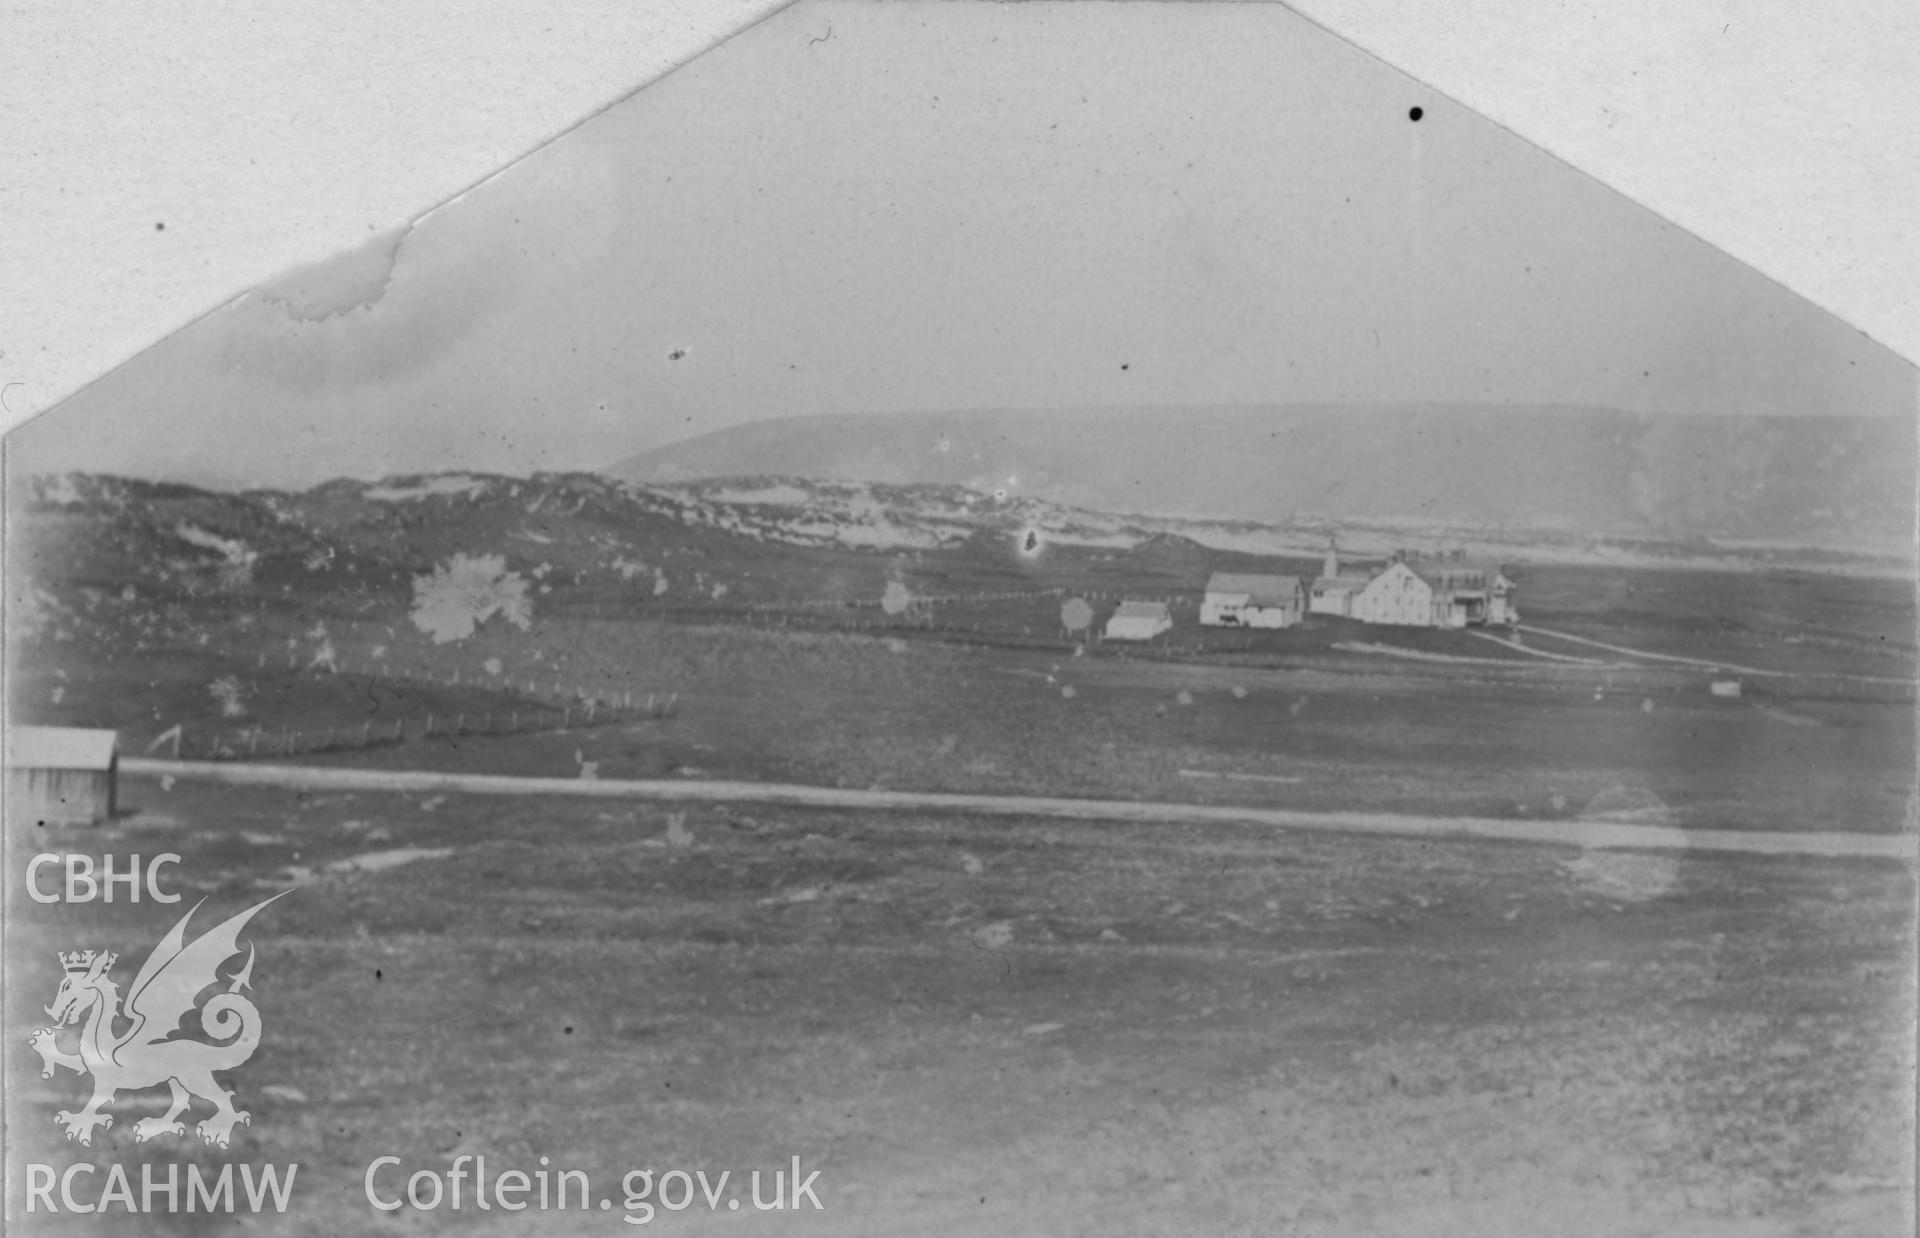 "A car near Borth 1907" Digitised from a photograph album showing views of Aberystwyth and District, produced by David John Saer, school teacher of Aberystwyth. Loaned for copying by Dr Alan Chamberlain.